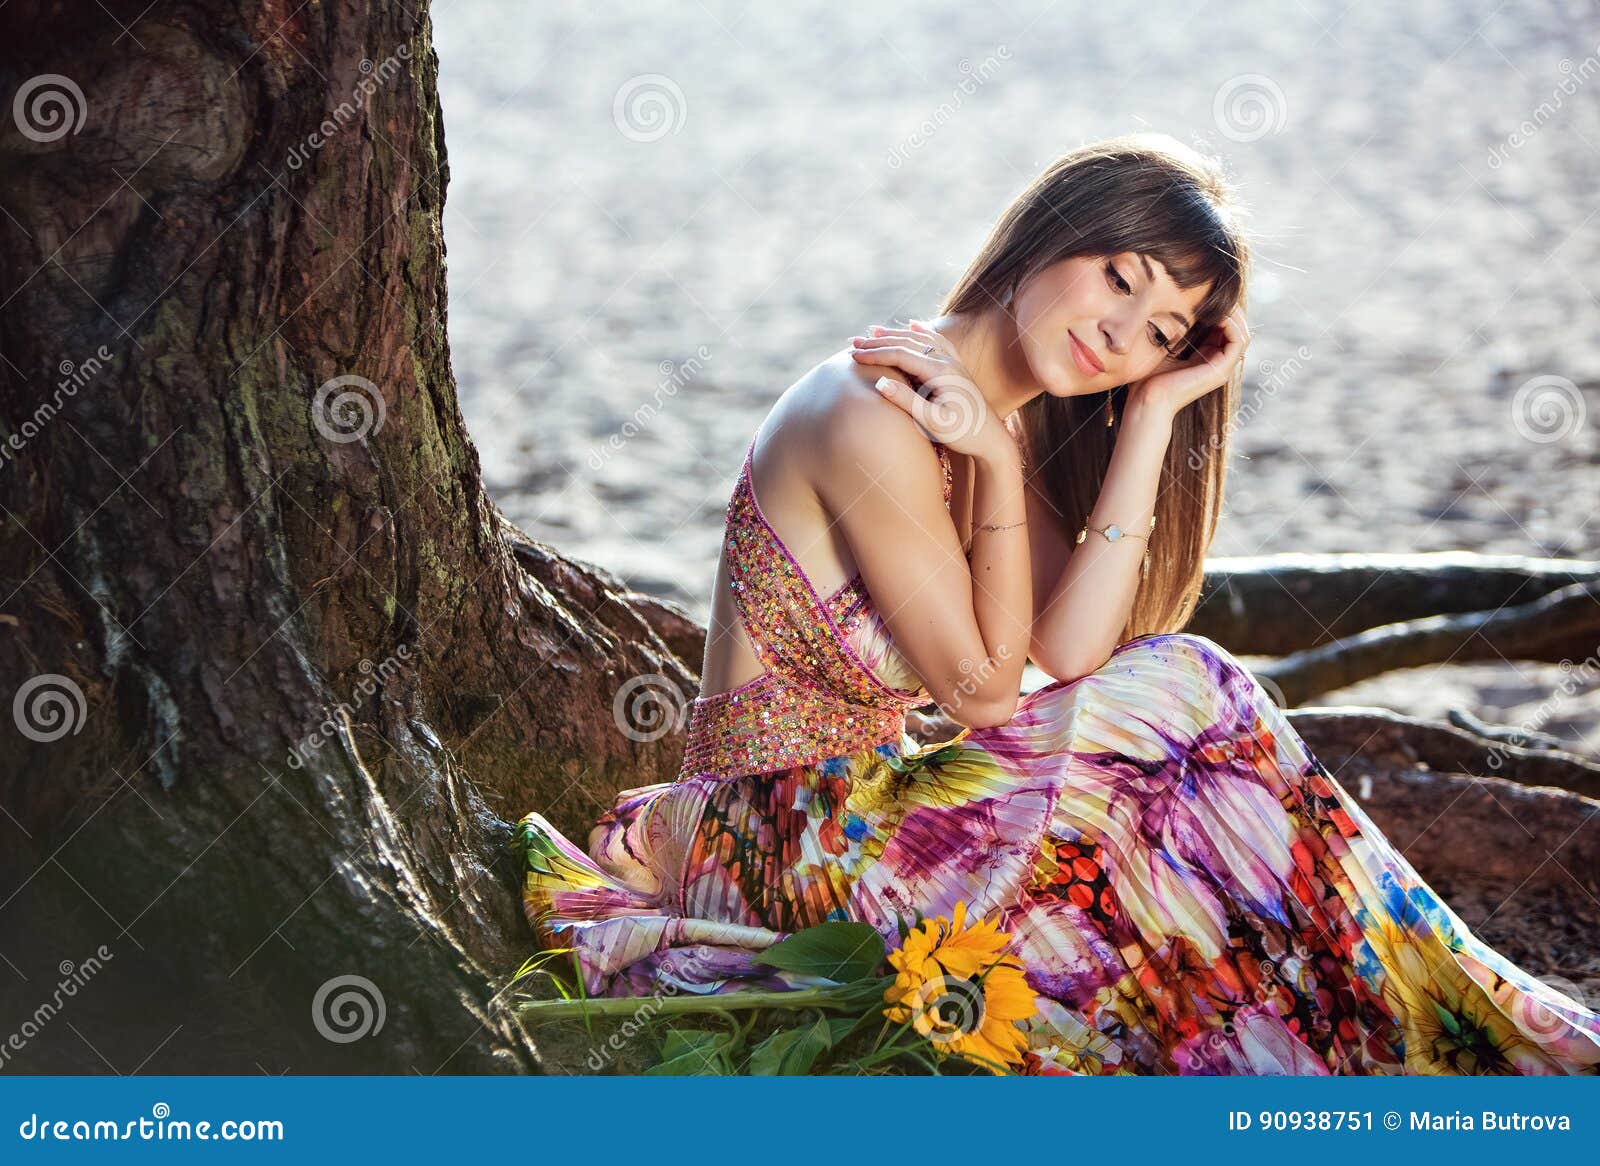 Portrait Of A Cute Tender Girl With Straight Hair In Beautiful C Stock Image Image Of Leaves